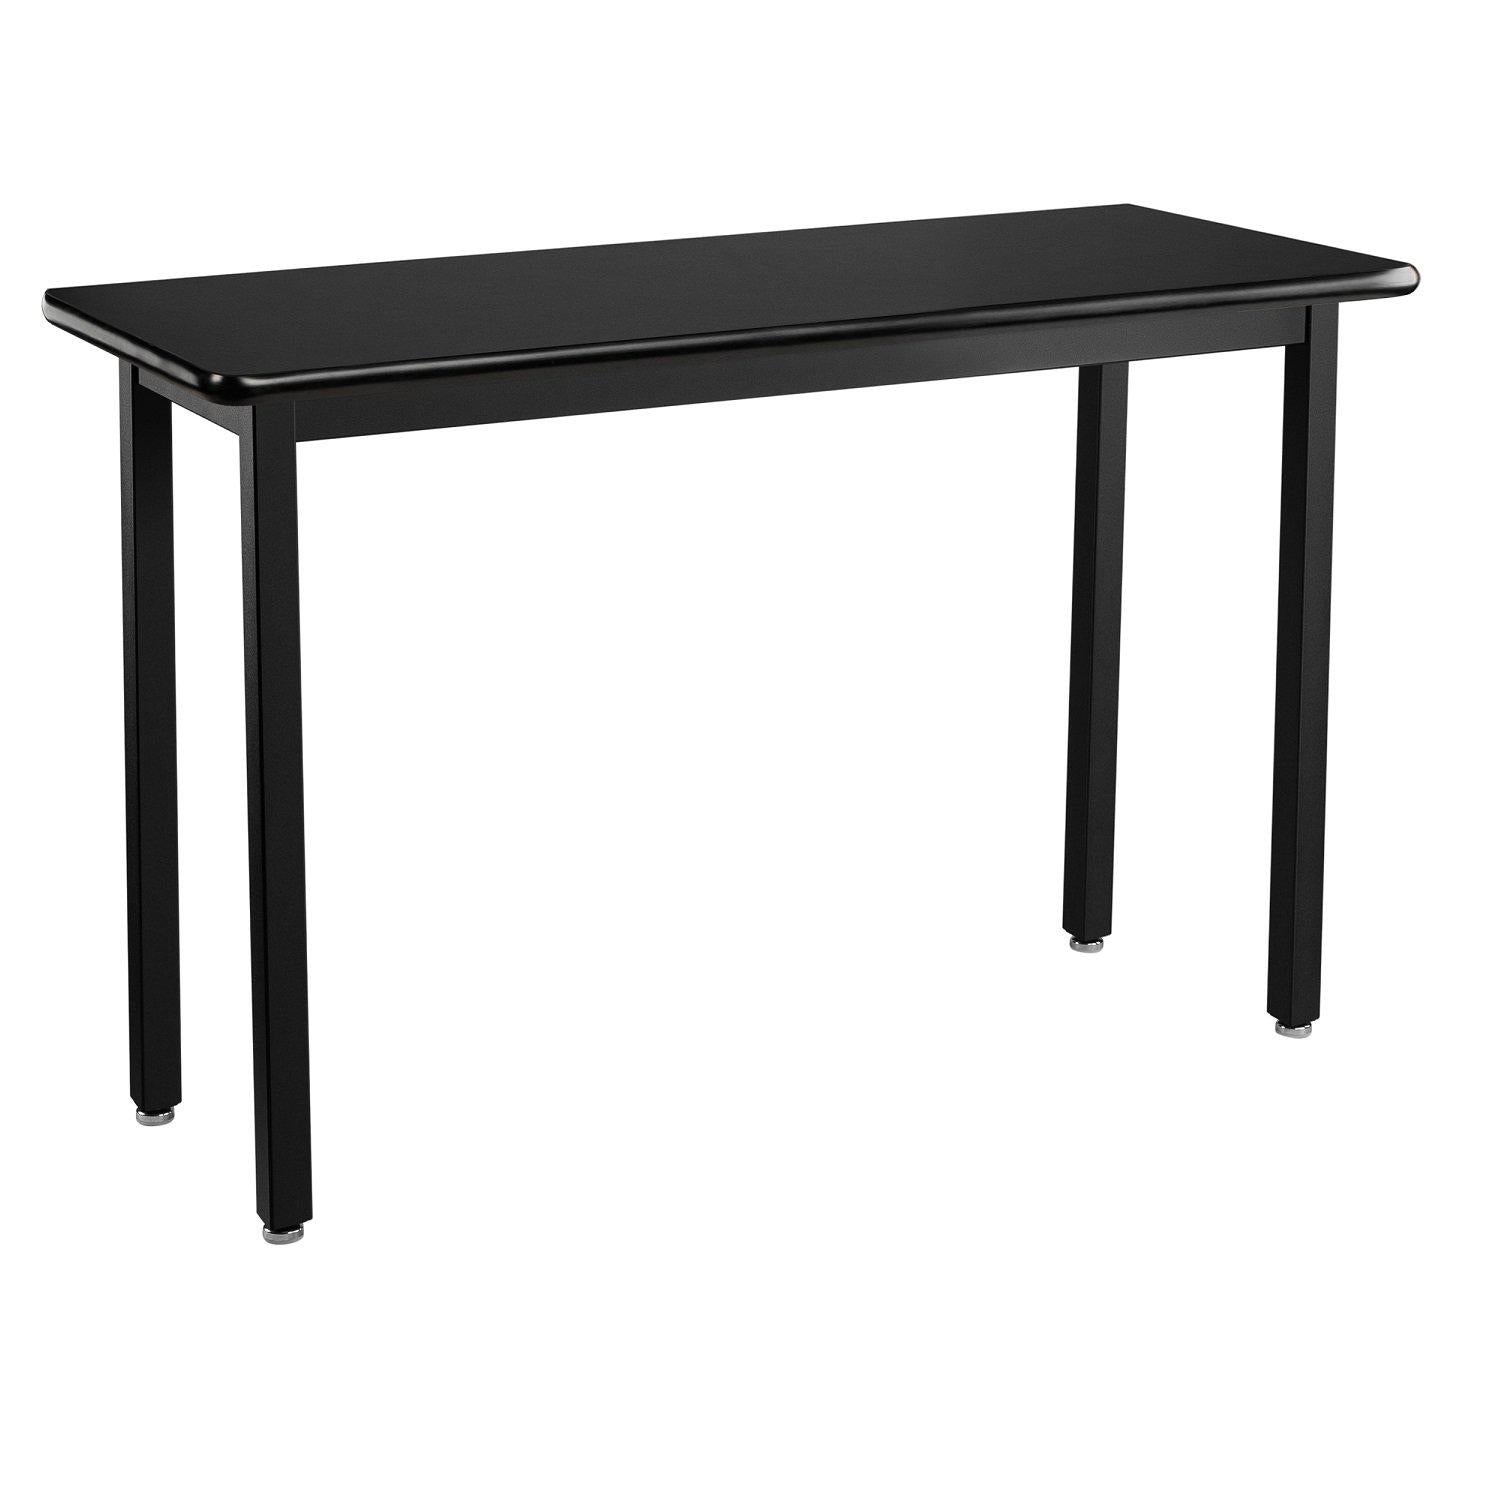 Heavy-Duty Fixed Height Utility Table, Black Frame, 18" x 54", High-Pressure Laminate Top with T-Mold Edge